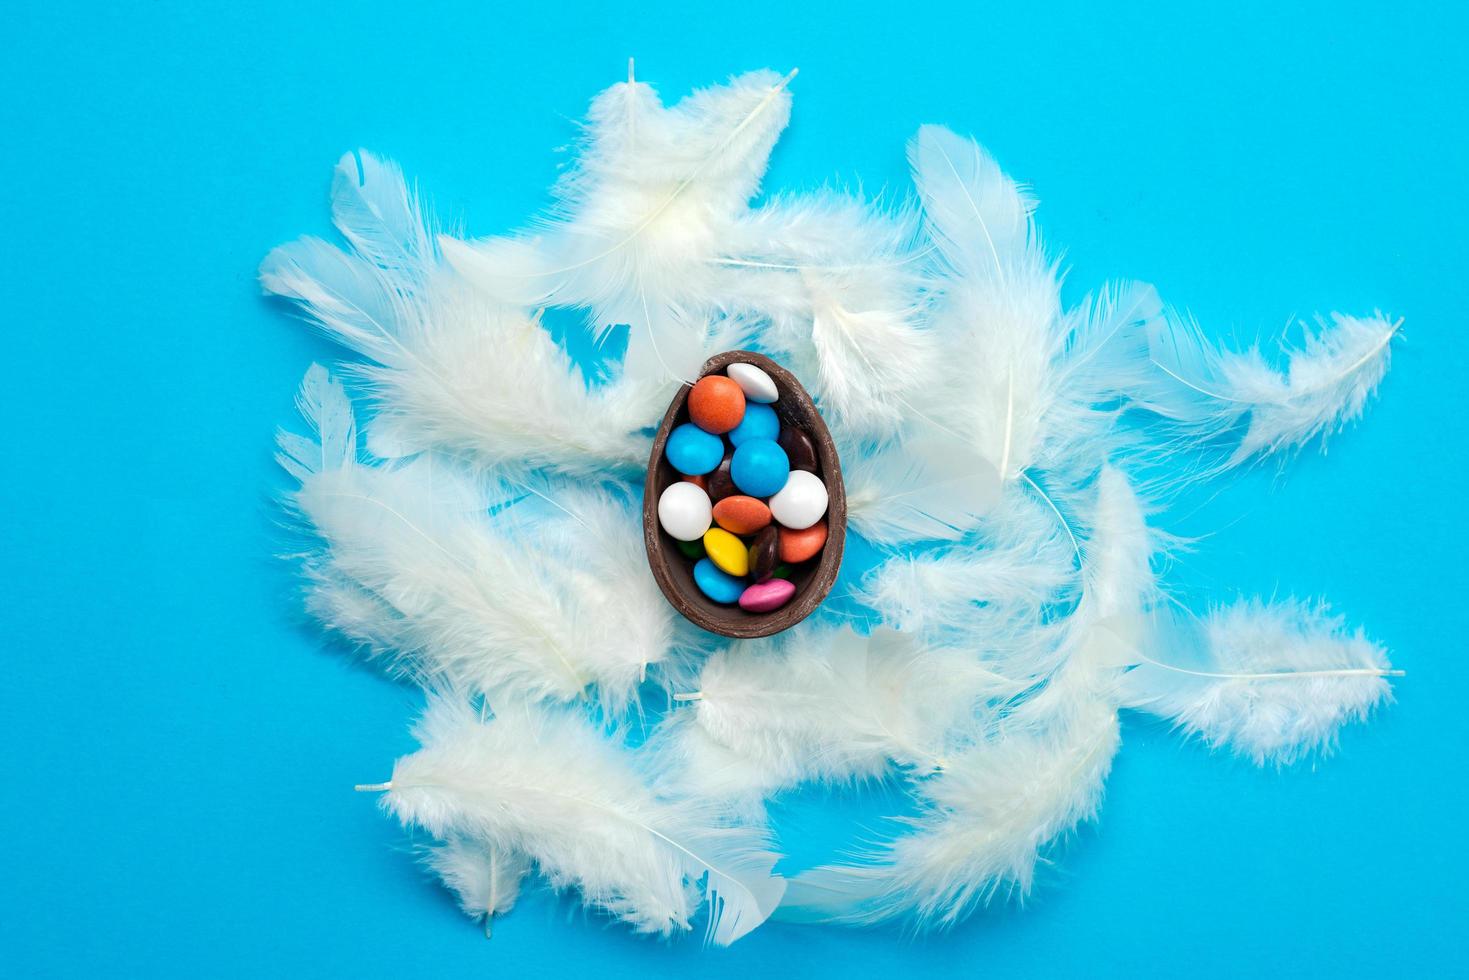 White feathers  lie on the blue Easter background. Multi-colored candies in the chocolate egg photo